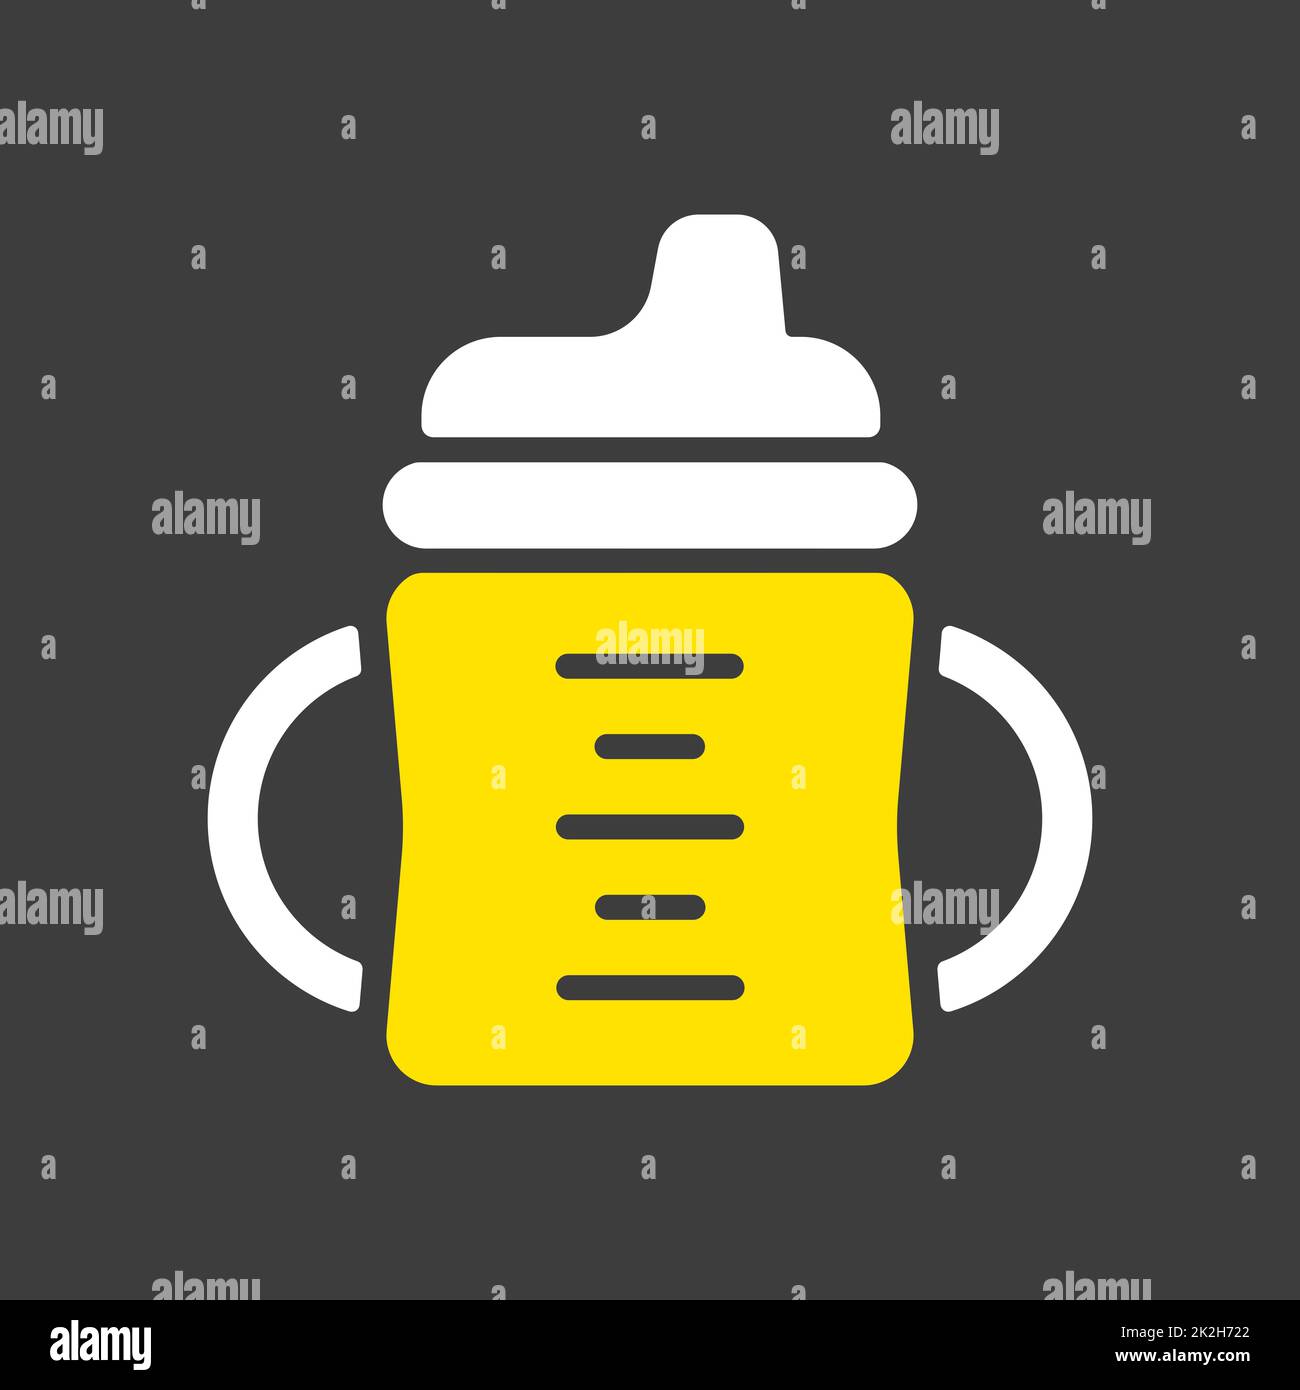 https://c8.alamy.com/comp/2K2H722/toddler-sippy-cup-vector-glyph-icon-2K2H722.jpg